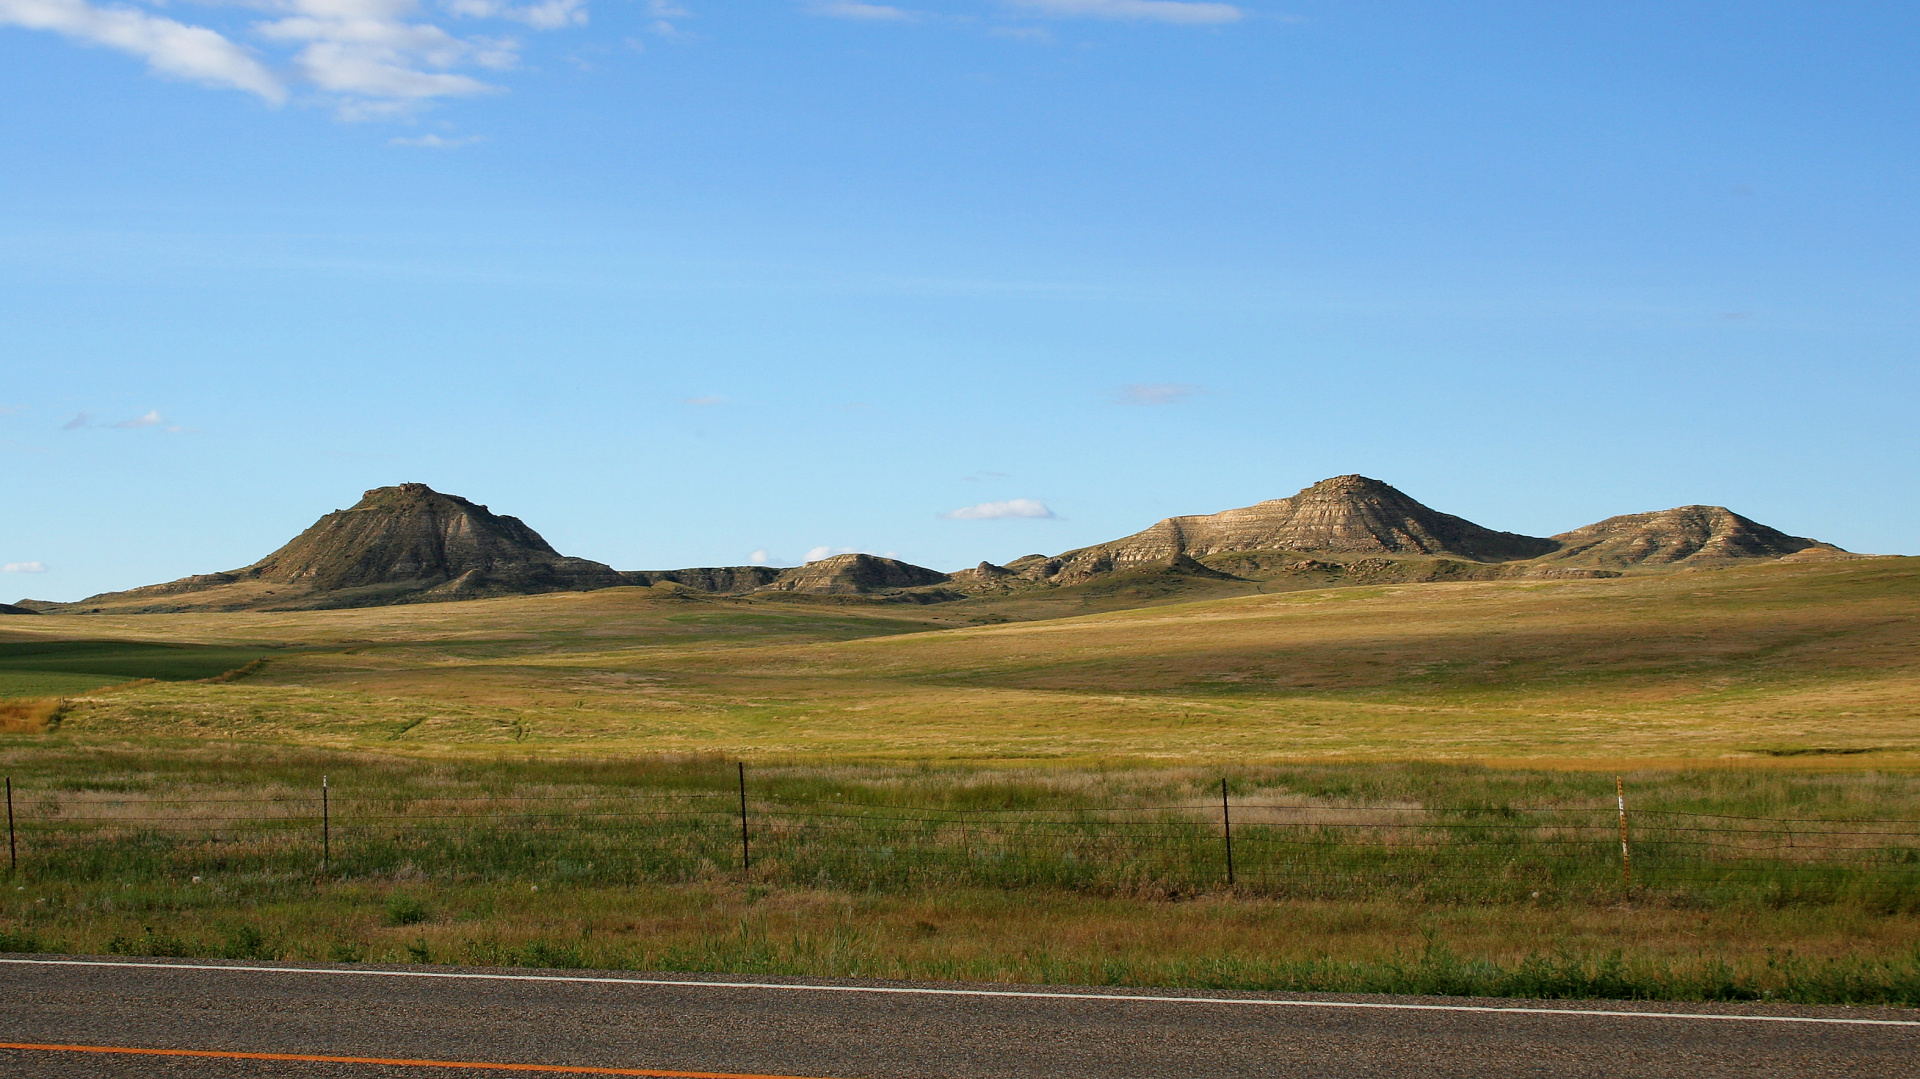 Buttes (Travels » US Trip 1: Cheyenne Country » The Journey » Route 212)